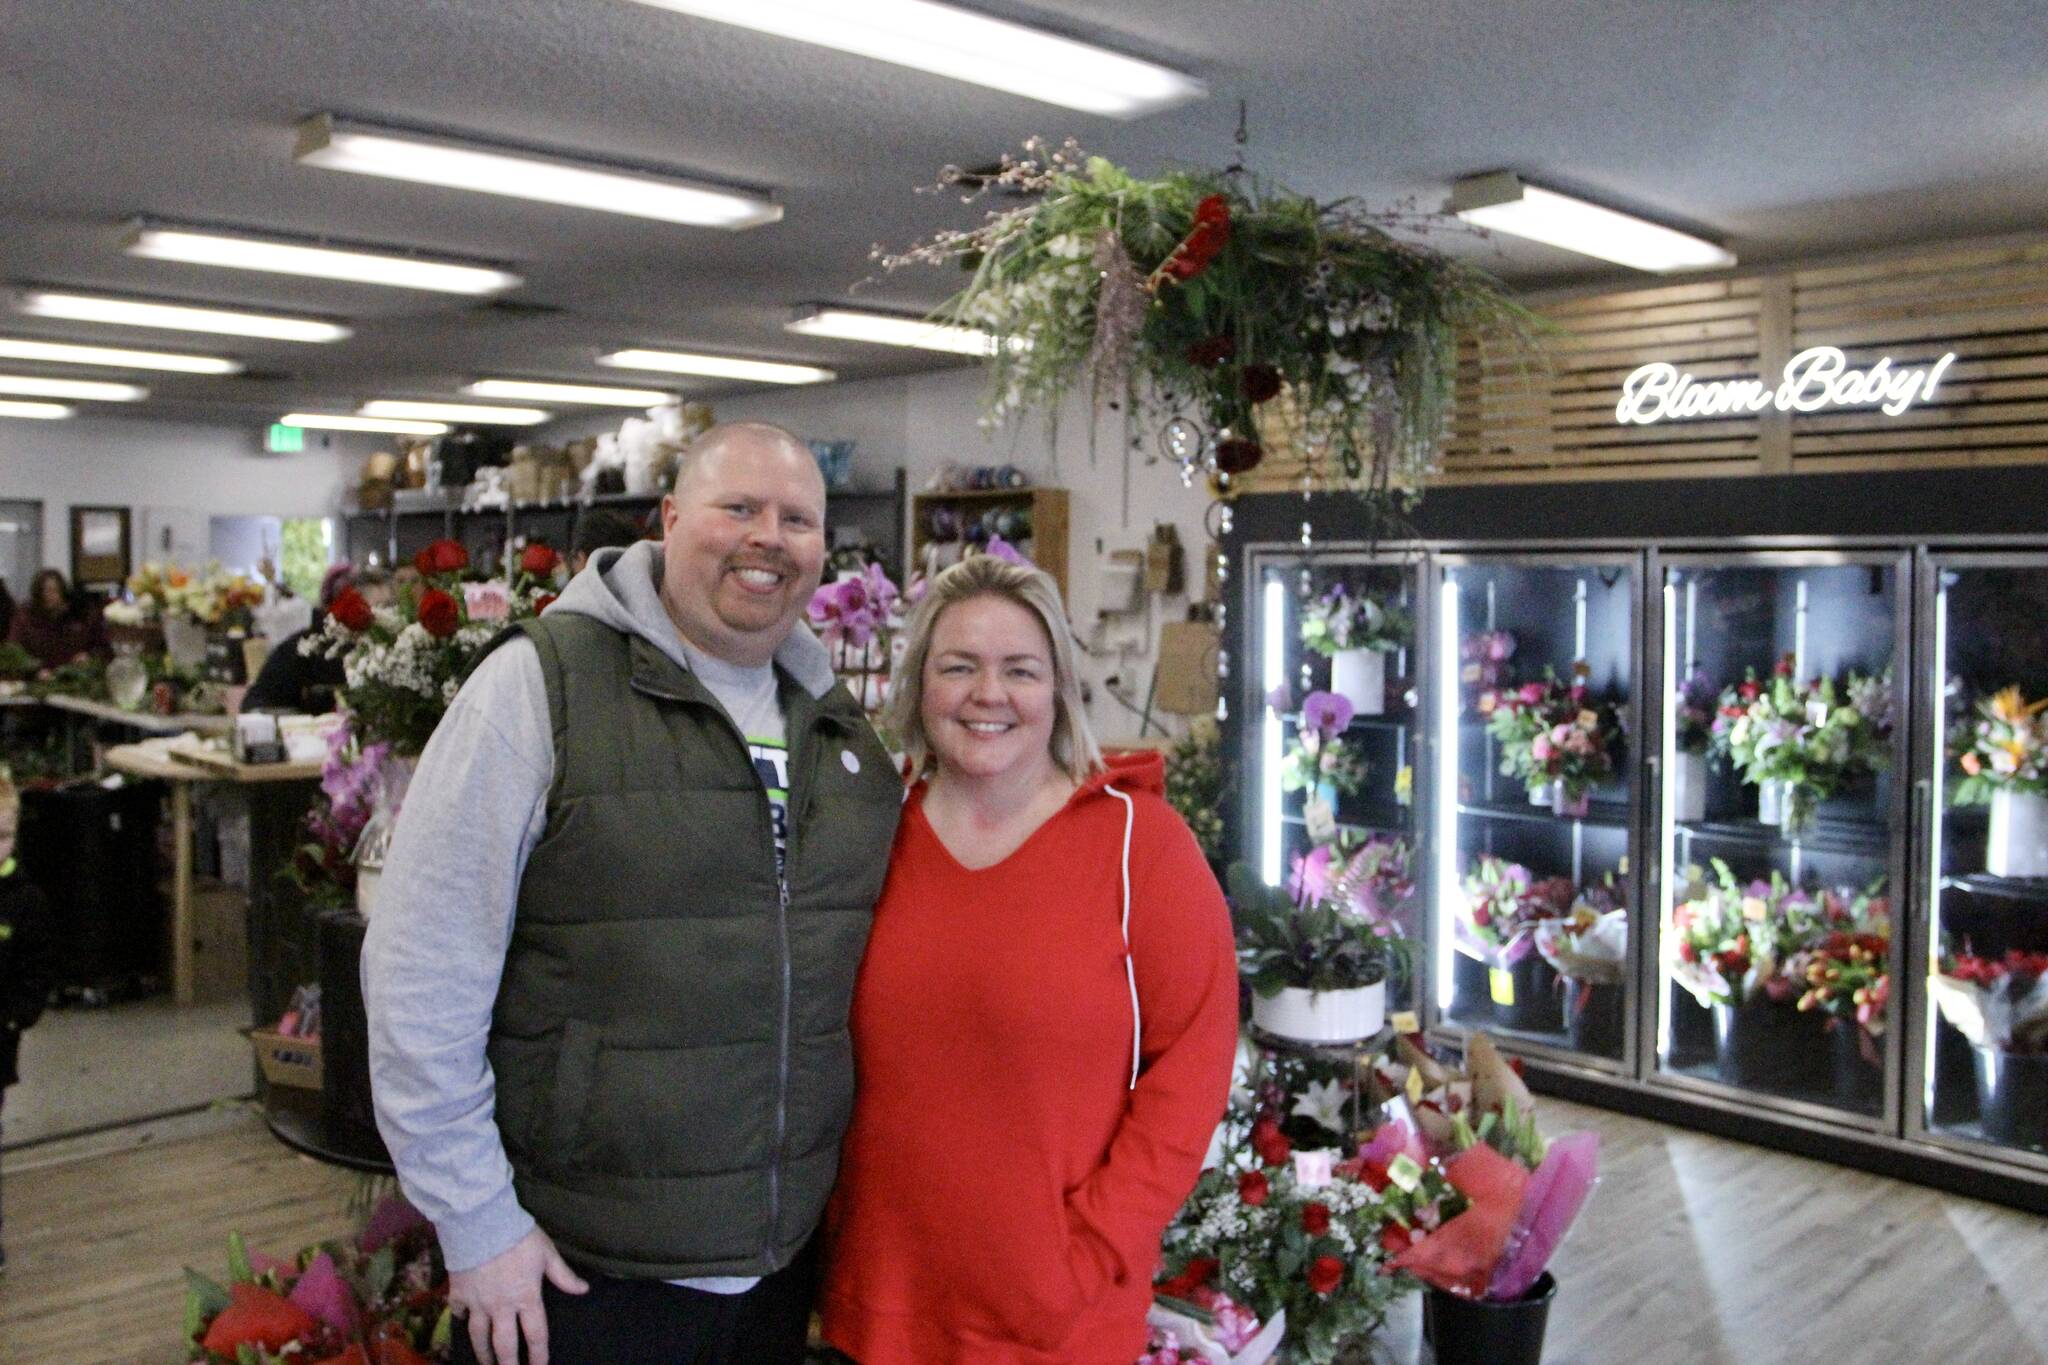 Owners Stephen Kostresh and Carla Kostresh pictured inside the Federal Way Buds and Blooms location on Valentine’s Day, Feb. 14. Olivia Sullivan / the Mirror